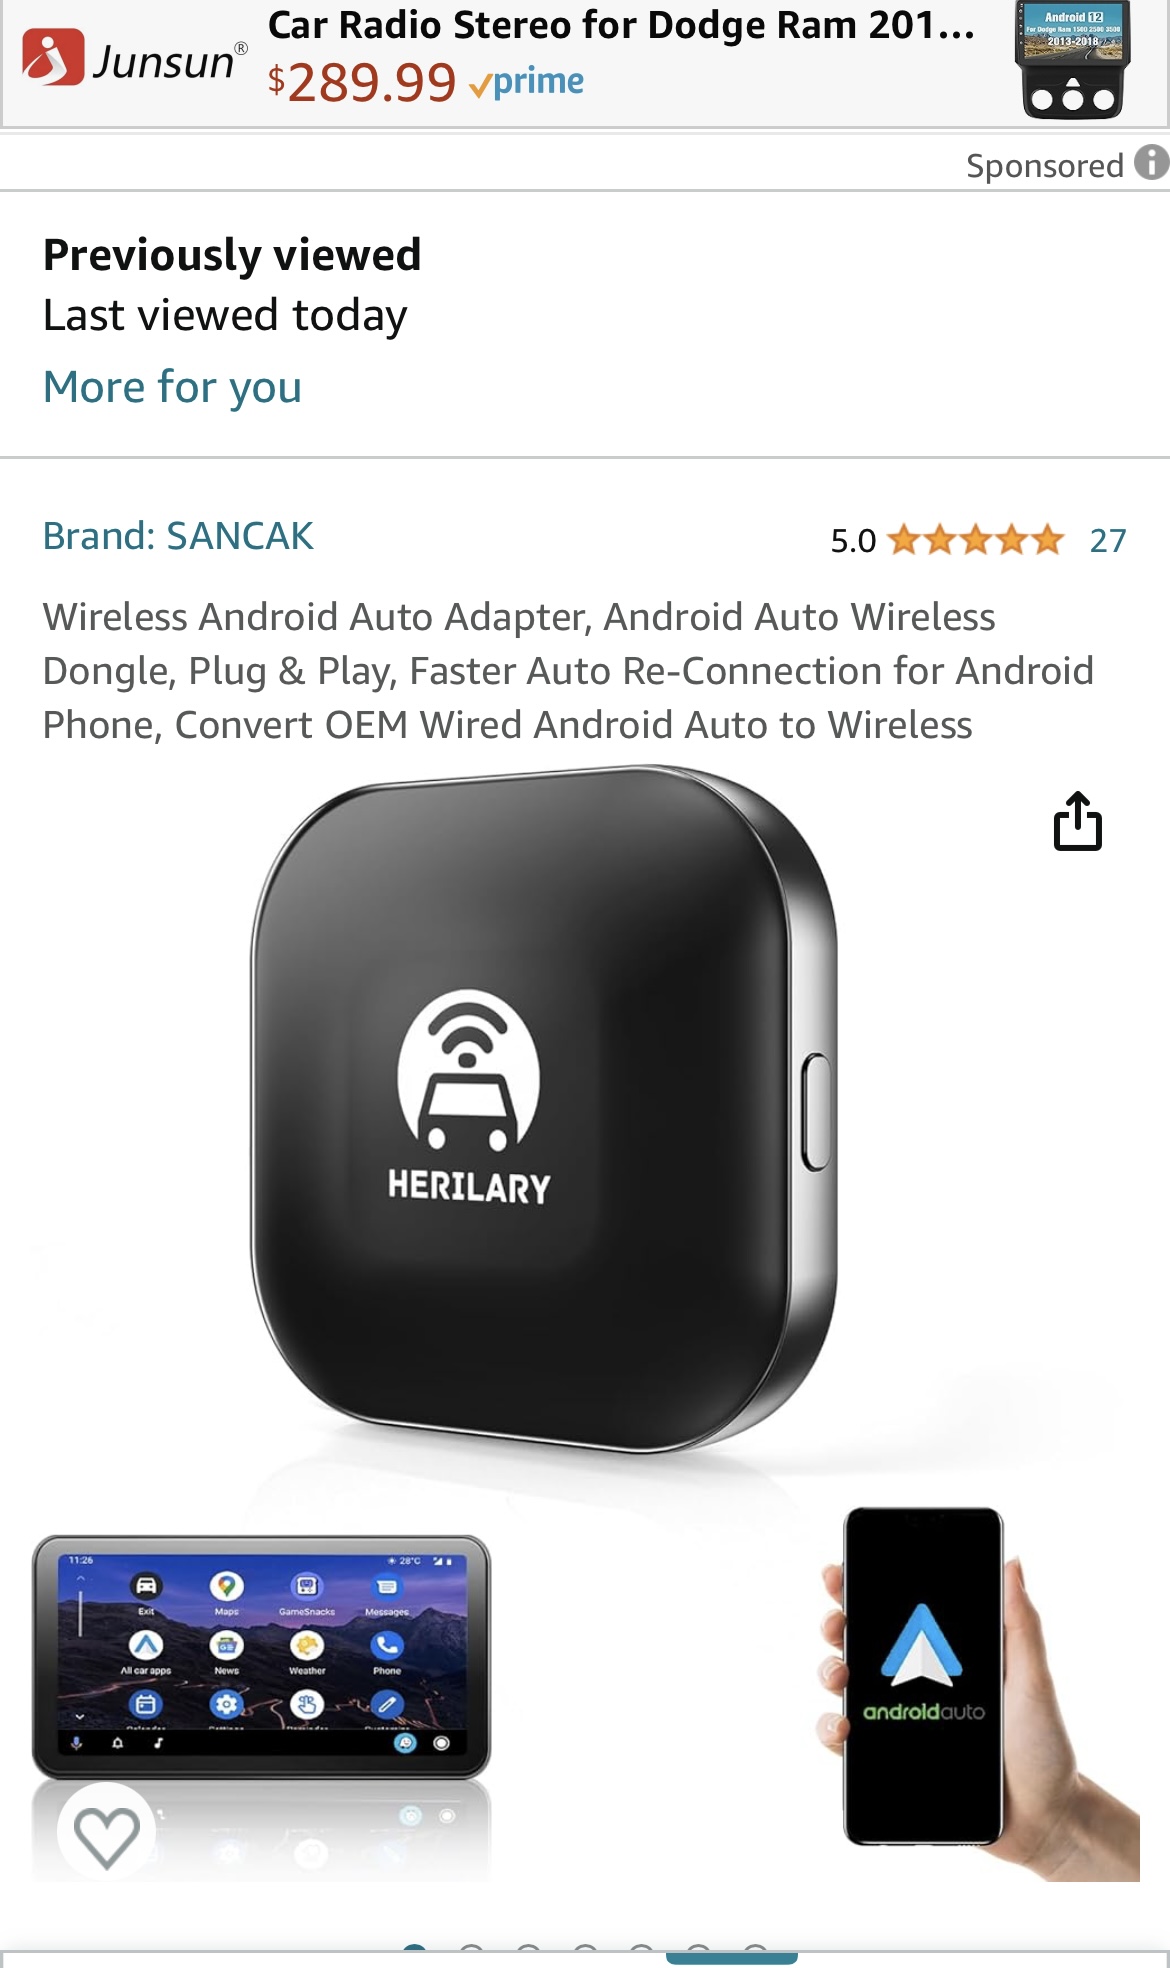 Can Anyone Recommend A Reliable Wireless Adaptor for Android Auto?   MaverickTruckClub - 2022+ Ford Maverick Pickup Forum, News, Owners,  Discussions